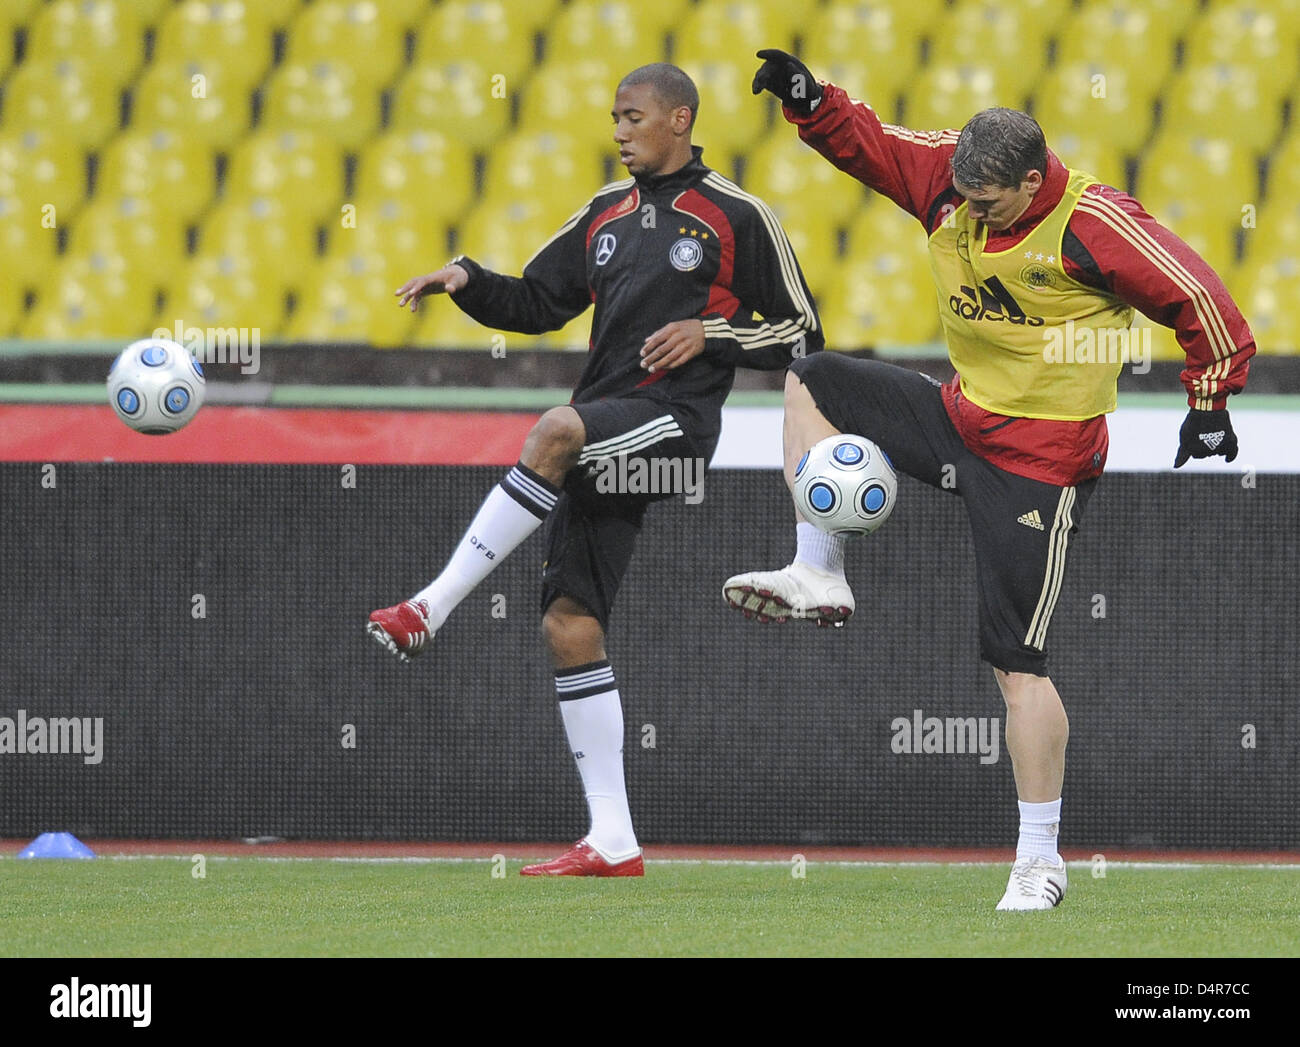 Germany internationals Jerome Boateng (L) and Bastian Schweinsteiger (R) control the ball as the German national team trains on artificial turf in Moscow, Russia, 09 October 2009. The German team faces Russia?s squad for a crucial FIFA 2010 World Cup qualifier on 10 October to be held on artificial turf at Luzhniki stadium of Moscow. Photo: ACHIM SCHEIDEMANN Stock Photo